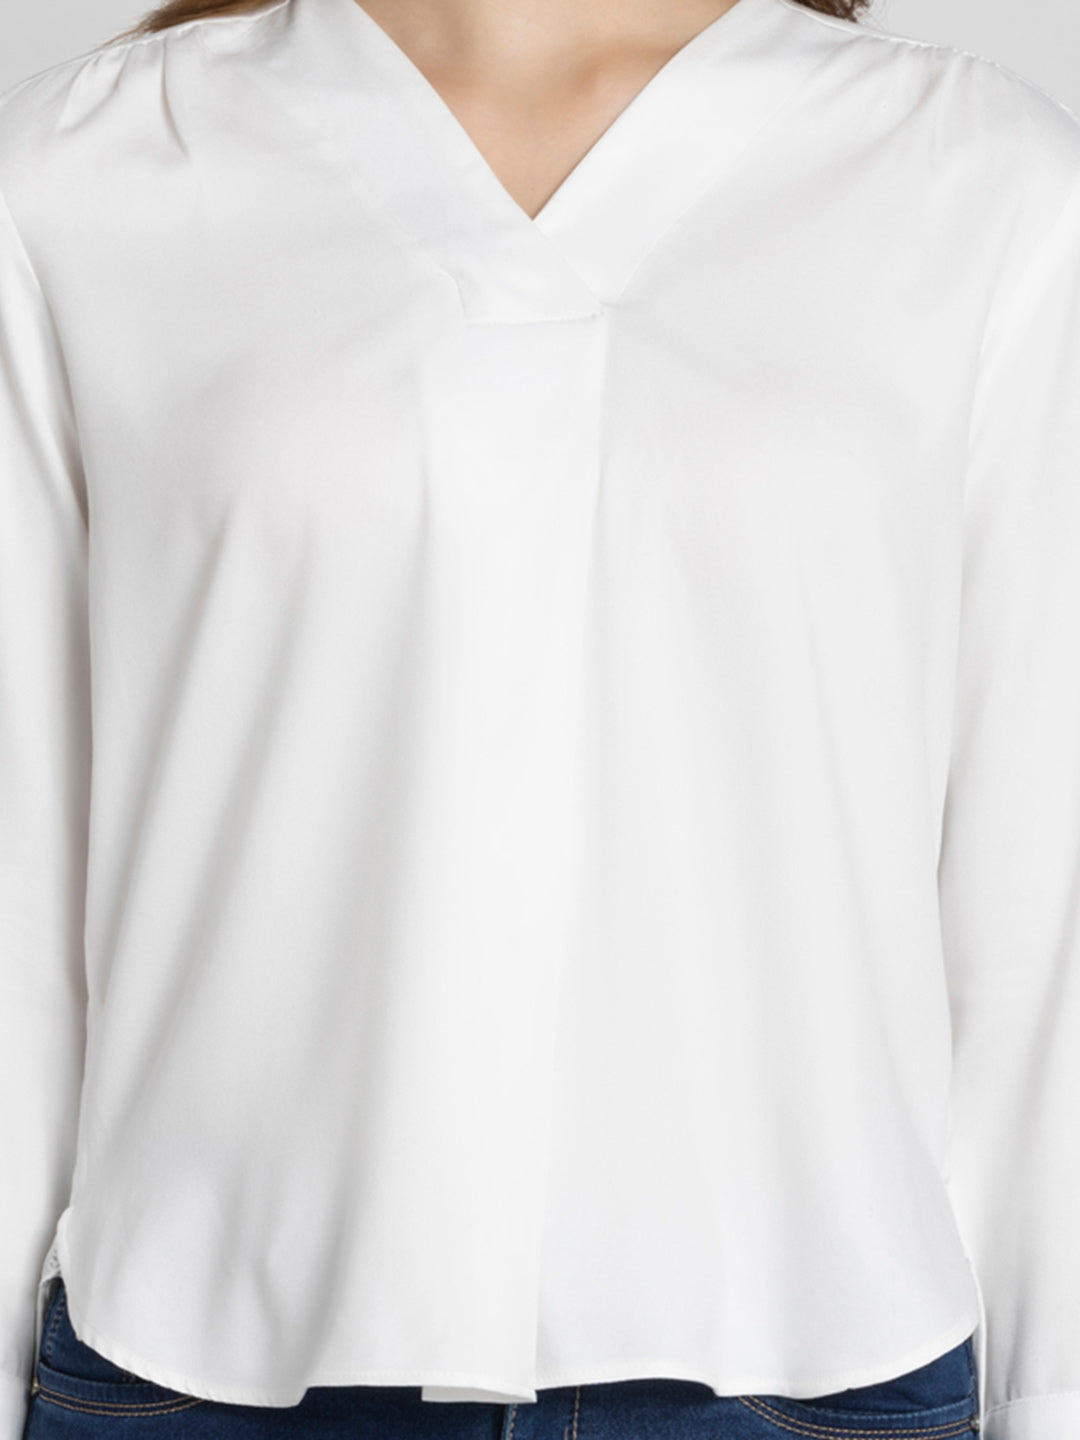 Love White Top from Shaye , for women